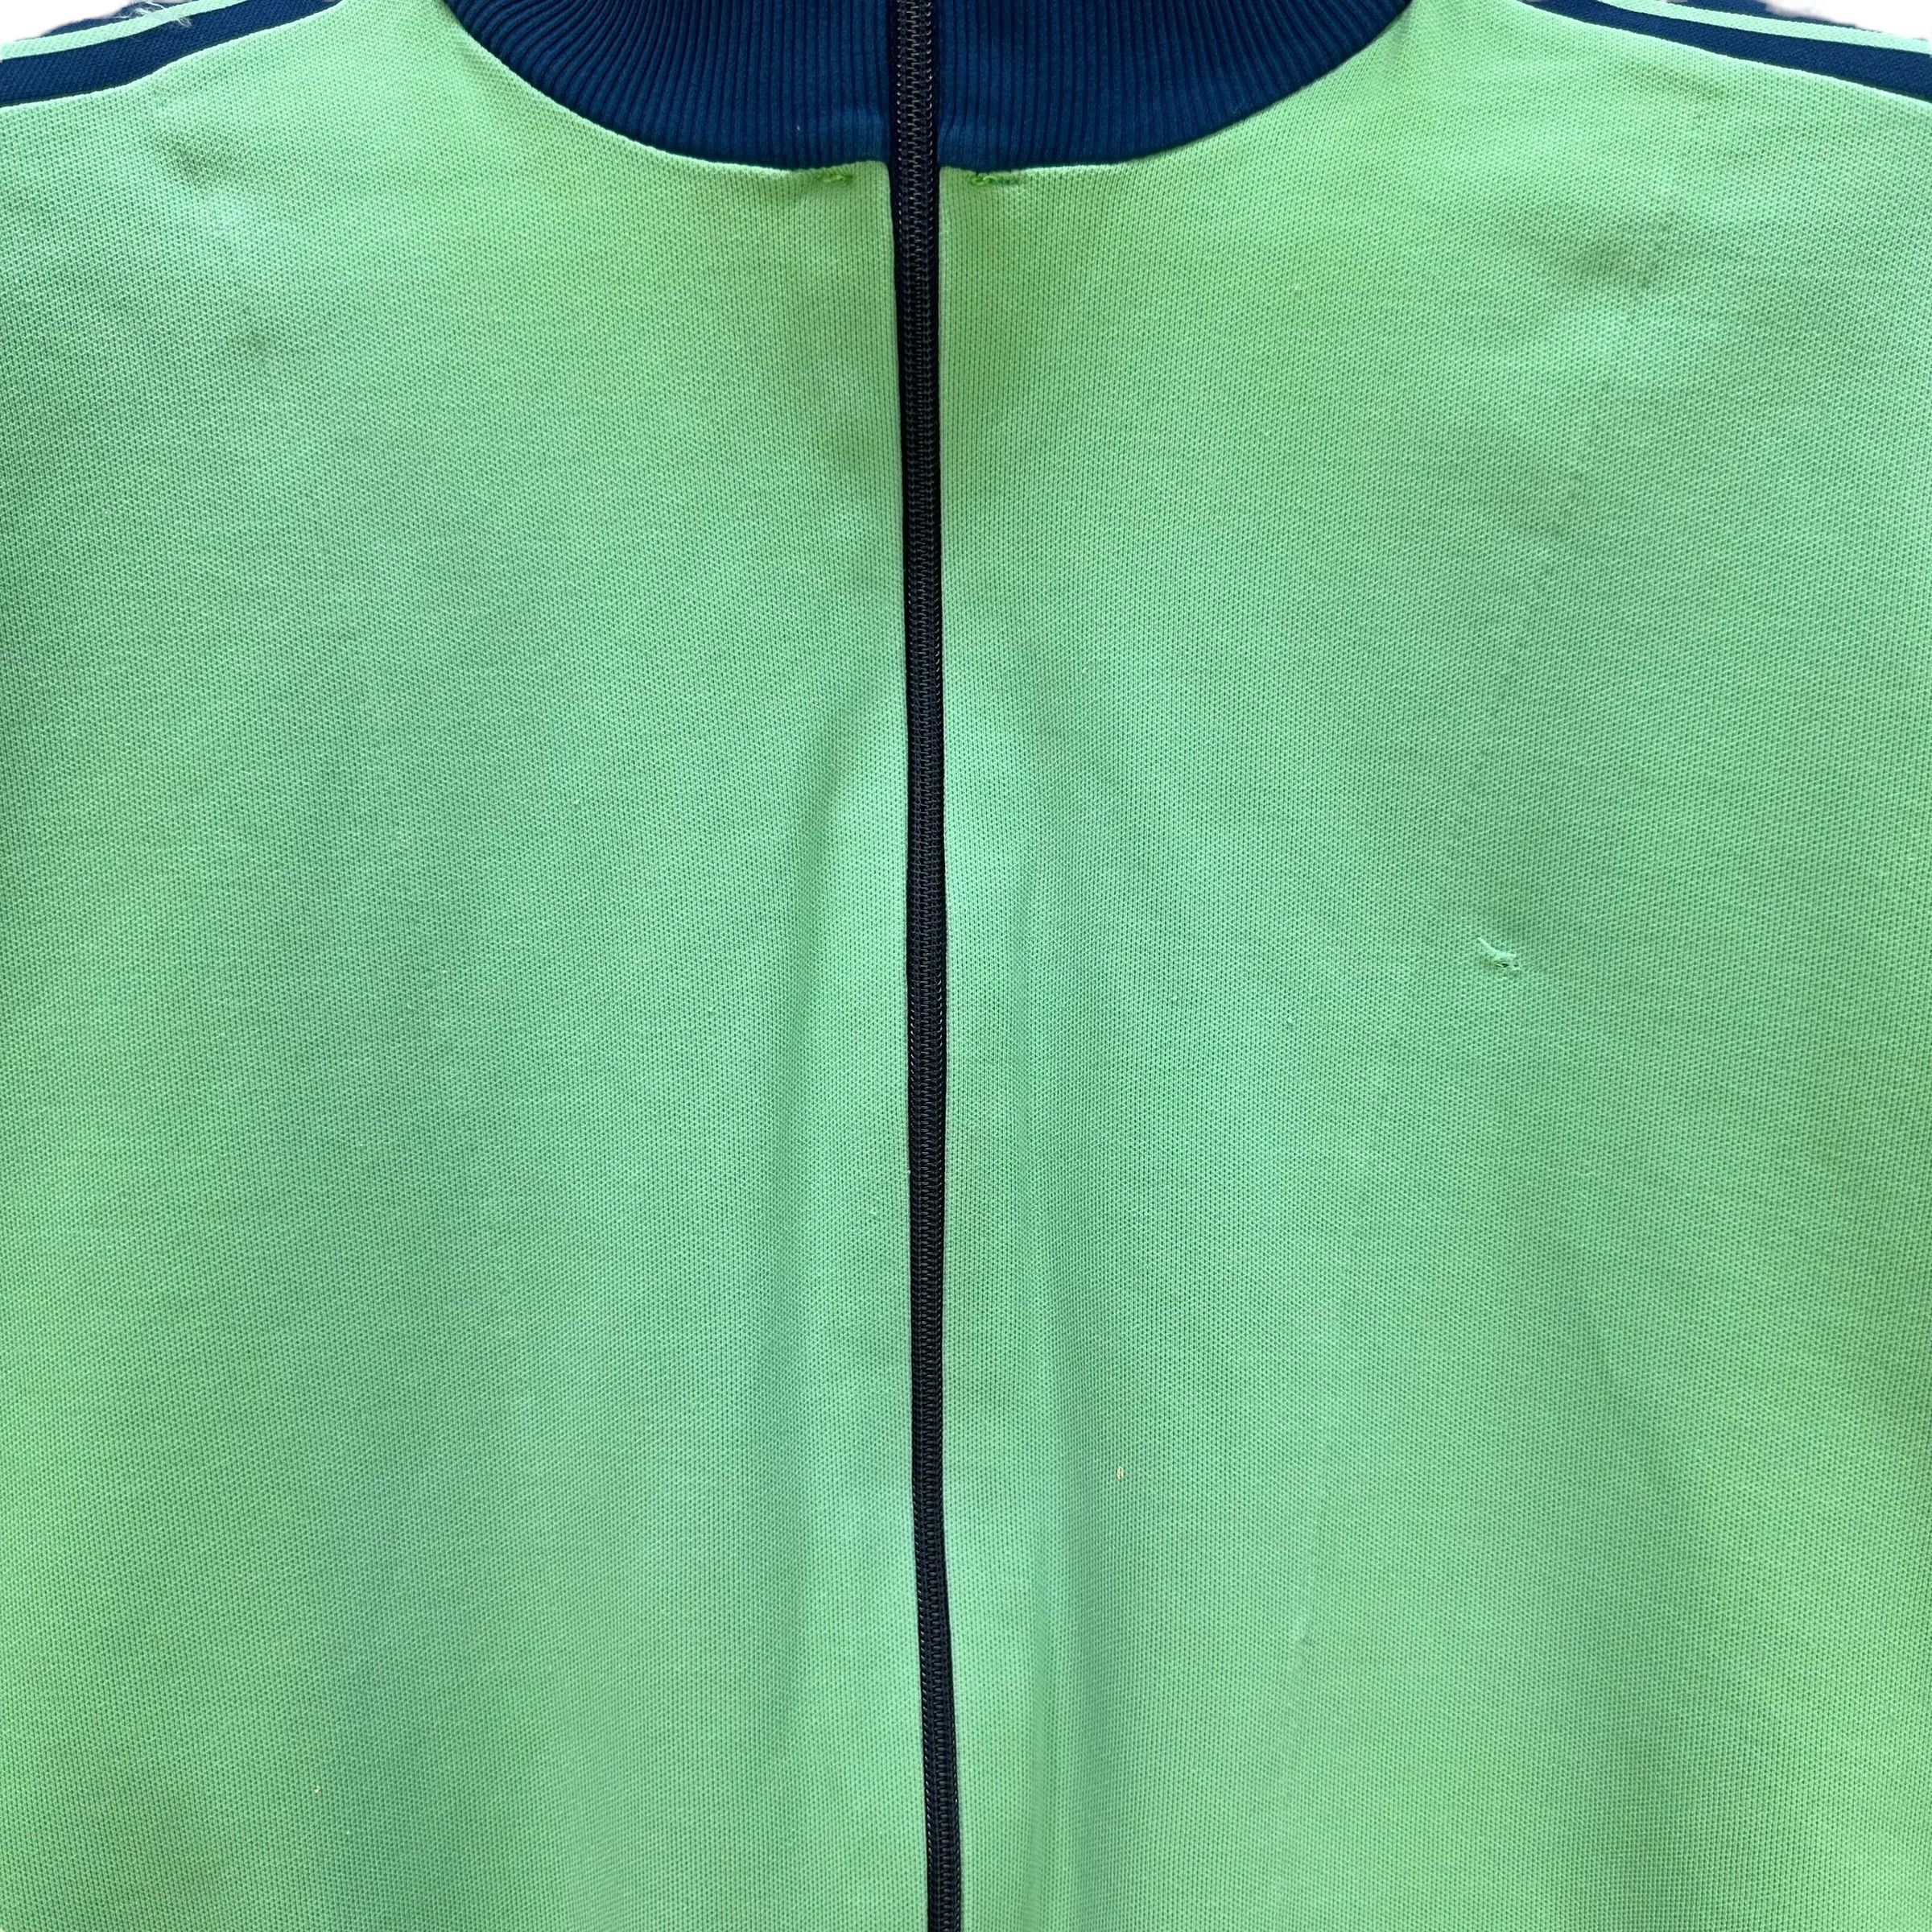 ADIDAS WEST GERMANY GREEN TRACK TOP JACKET #8817-028 - 4